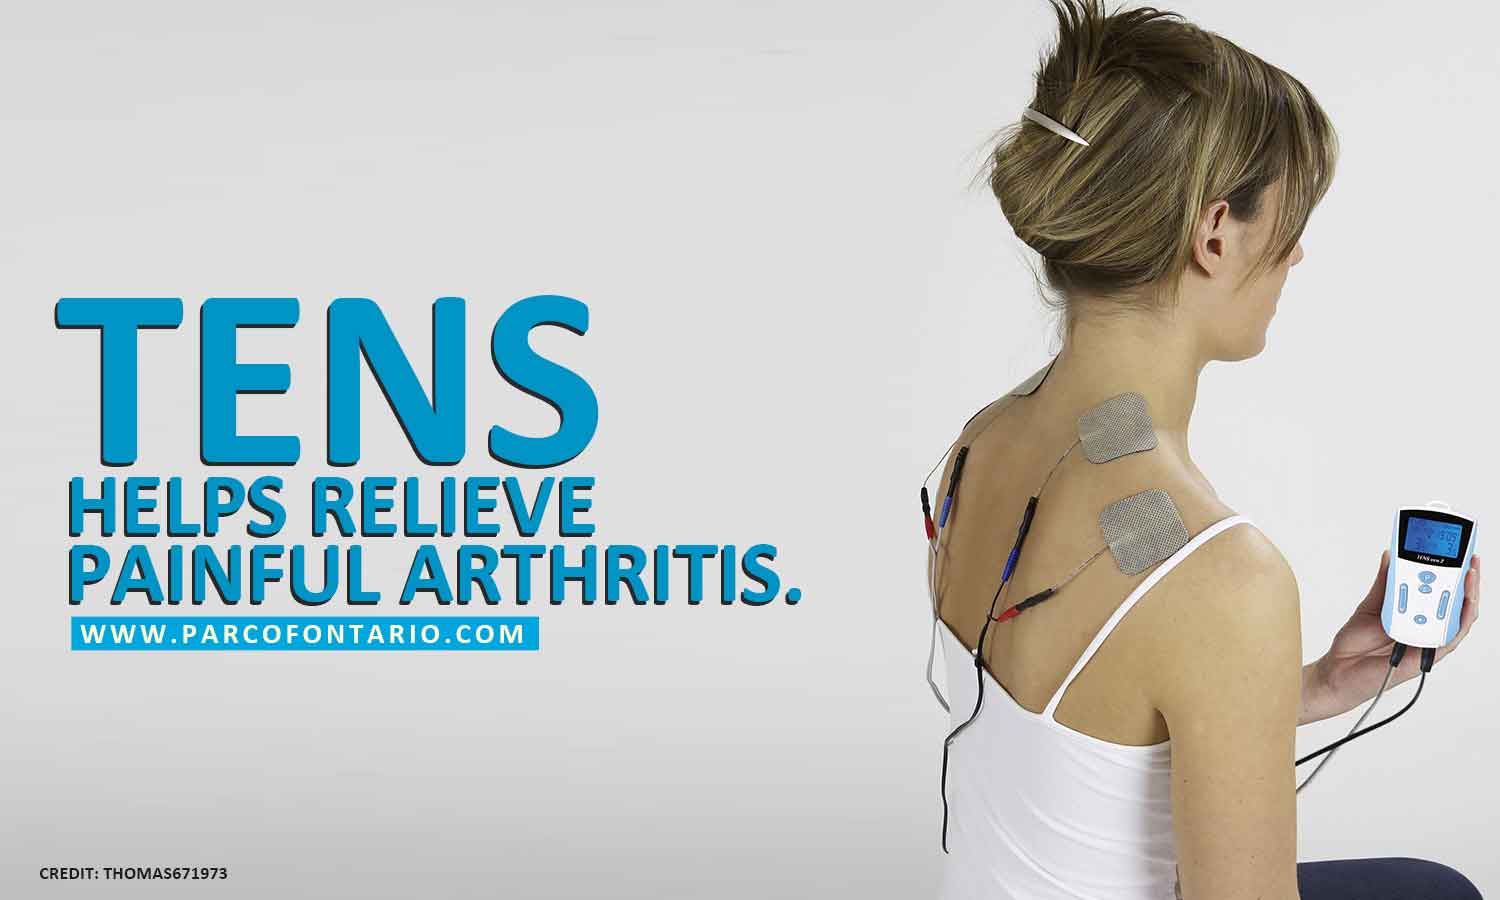 TENS helps relieve painful arthritis